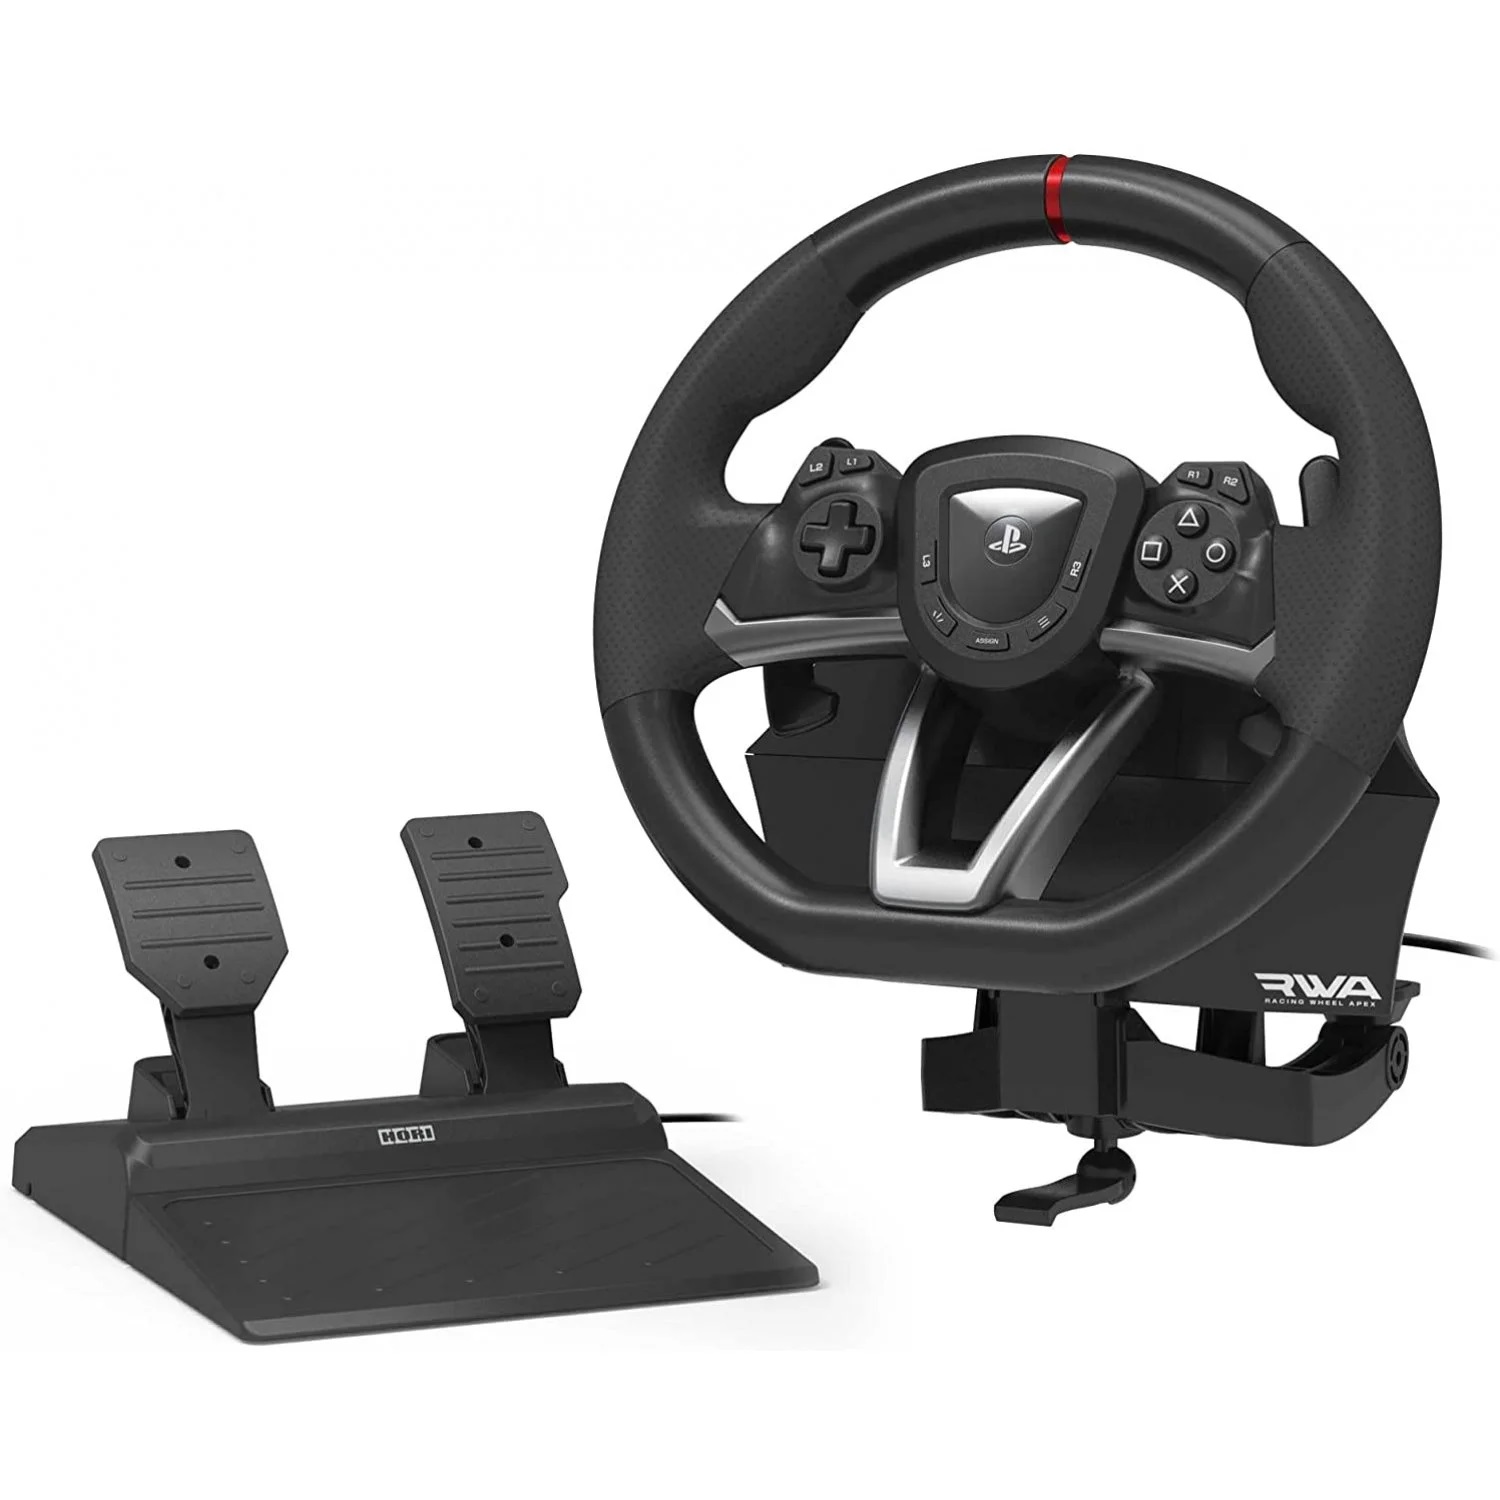 How To Use Hori Apex Racing Wheel On PC